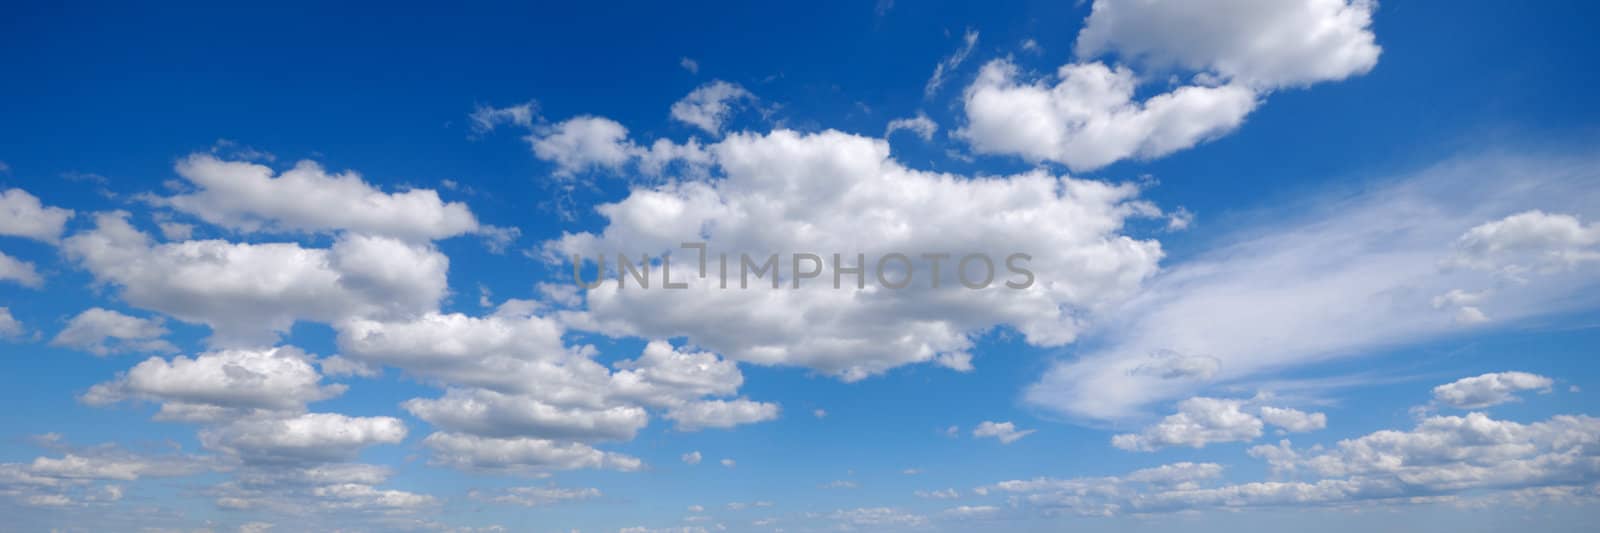 Clouds and blue sky by cfoto